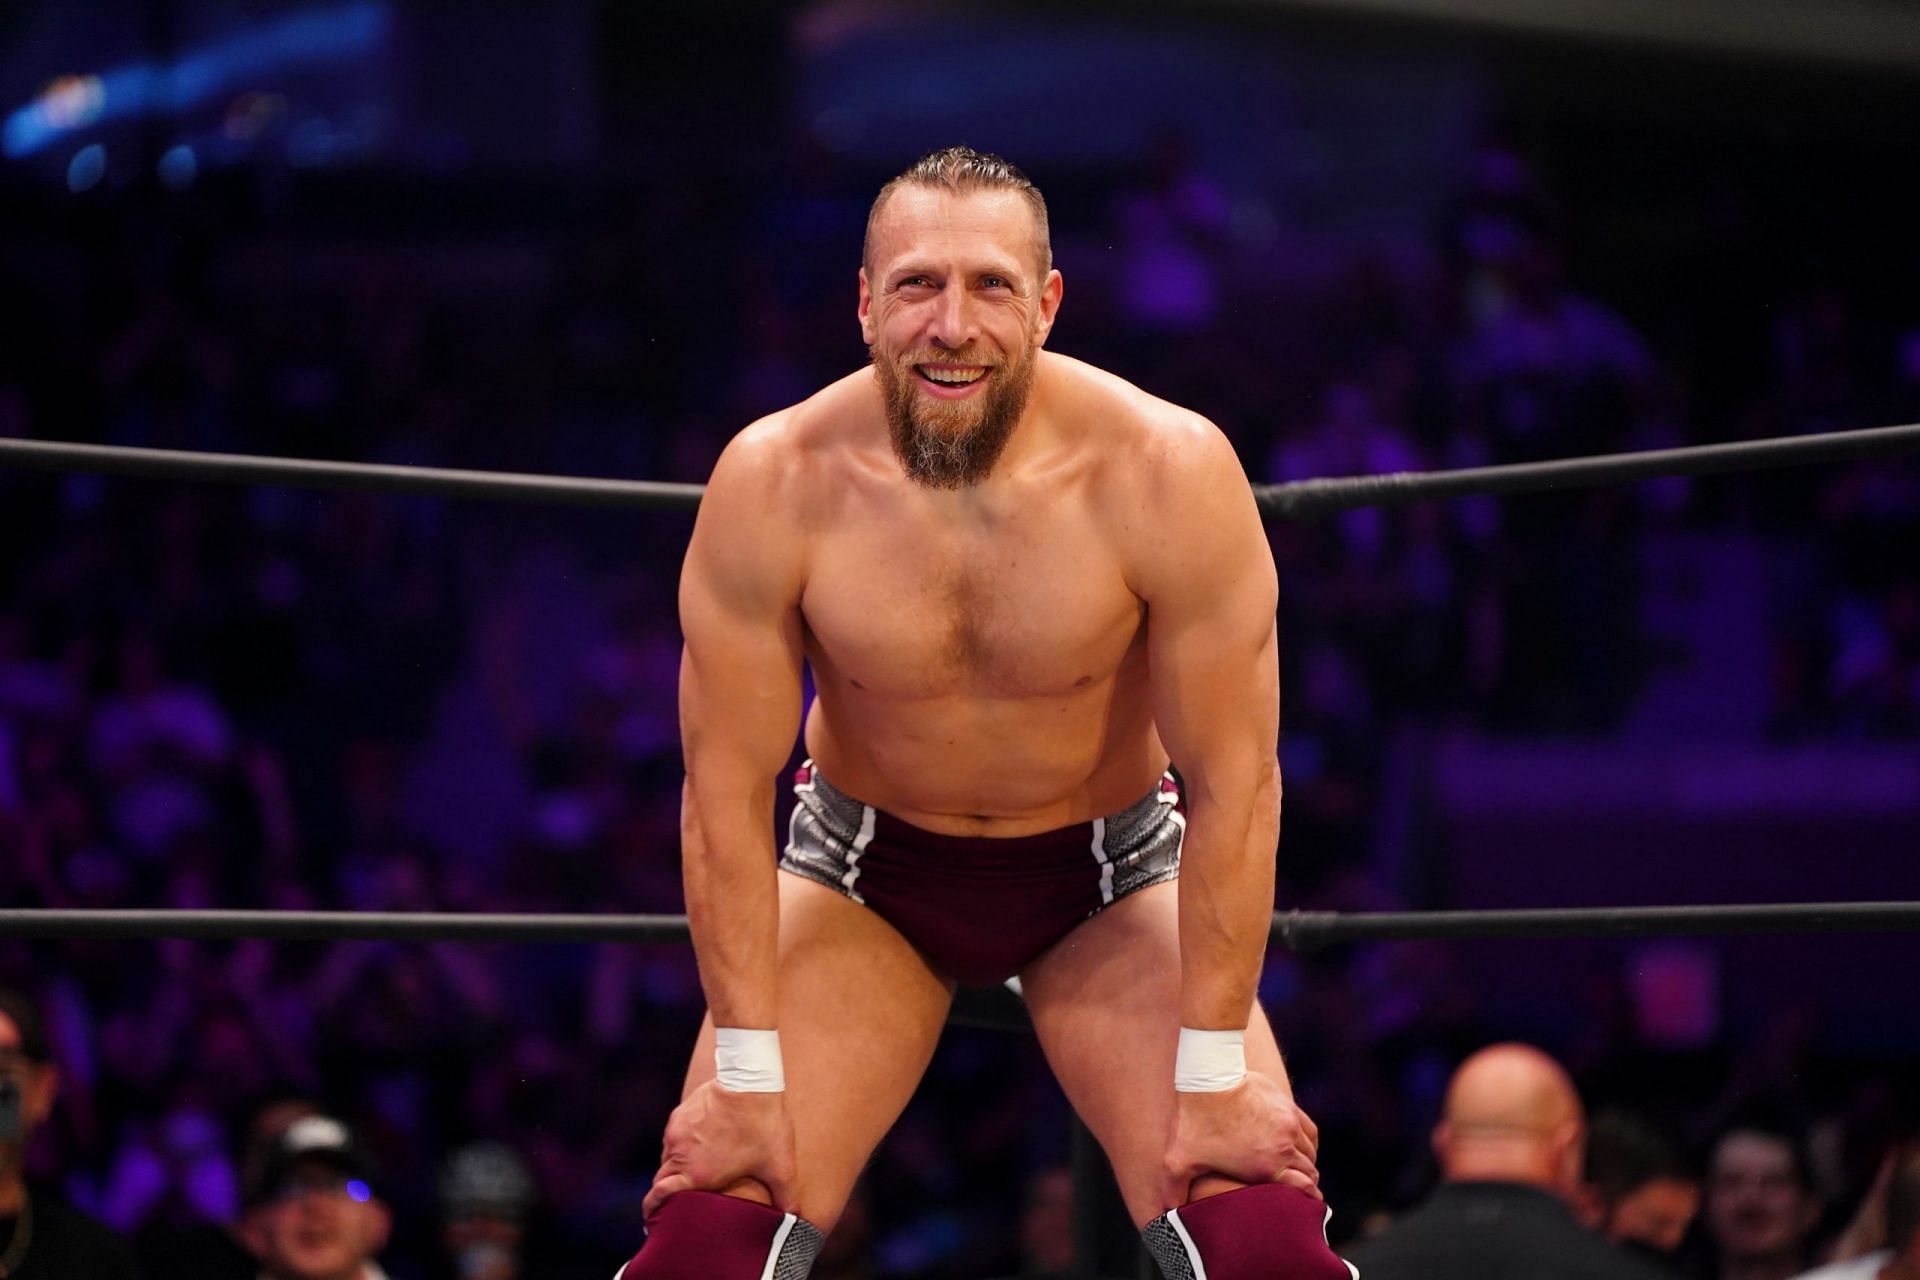 Bryan Danielson will be in action this week on AEW Dynamite